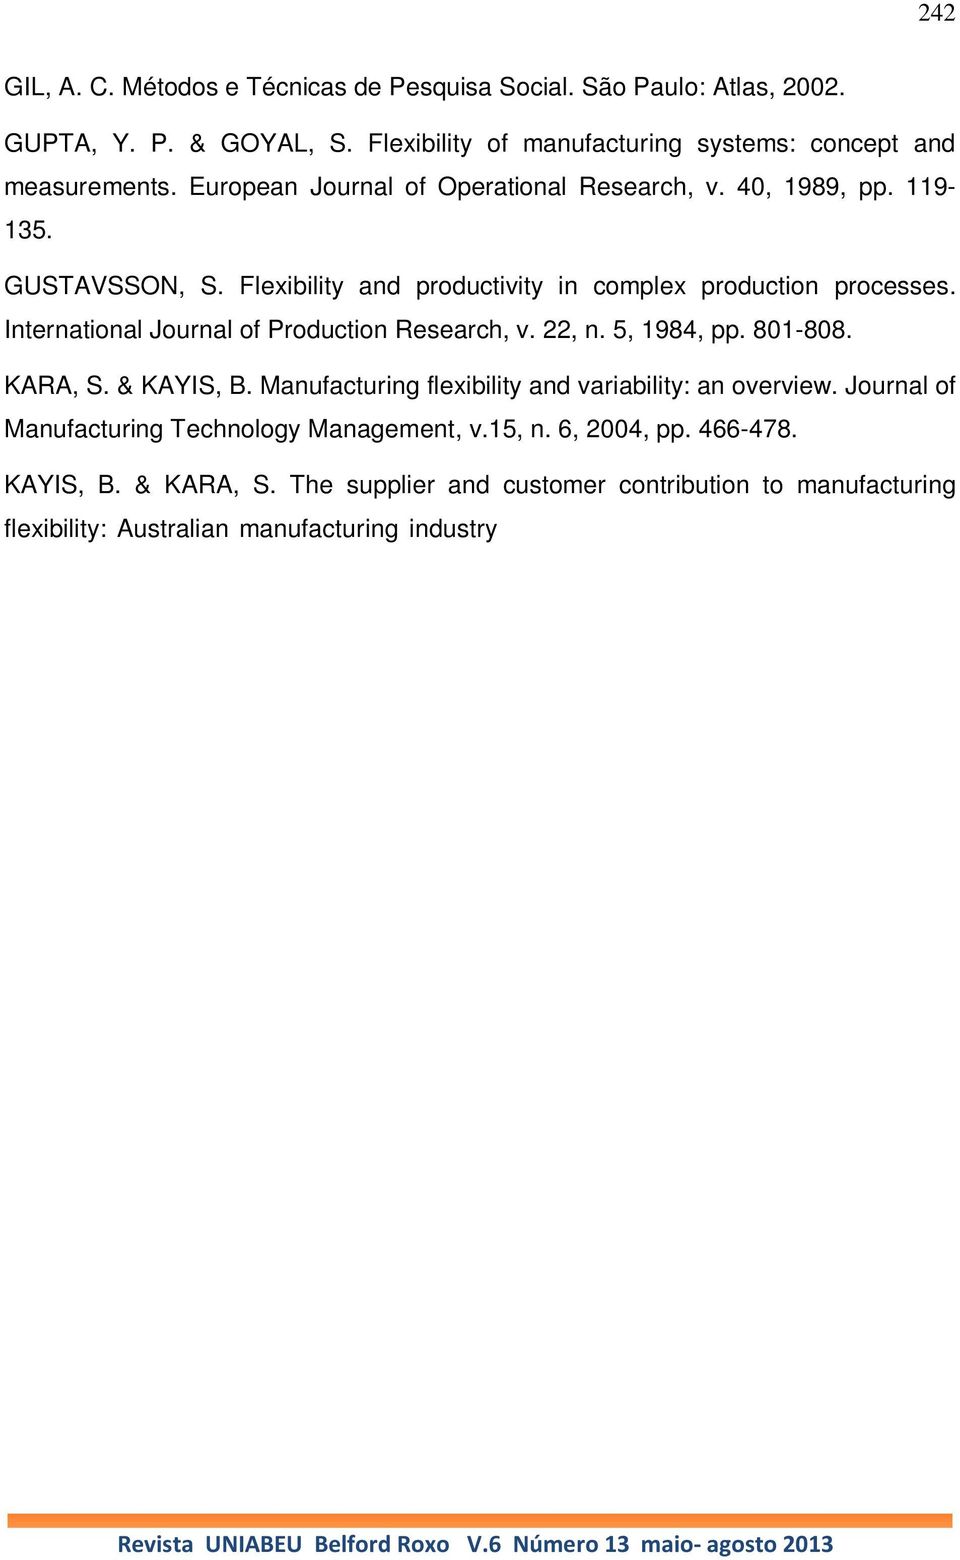 5, 1984, pp. 801-808. KARA, S. & KAYIS, B. Manufacturing flexibility and variability: an overview. Journal of Manufacturing Technology Management, v.15, n. 6, 2004, pp. 466-478. KAYIS, B. & KARA, S.